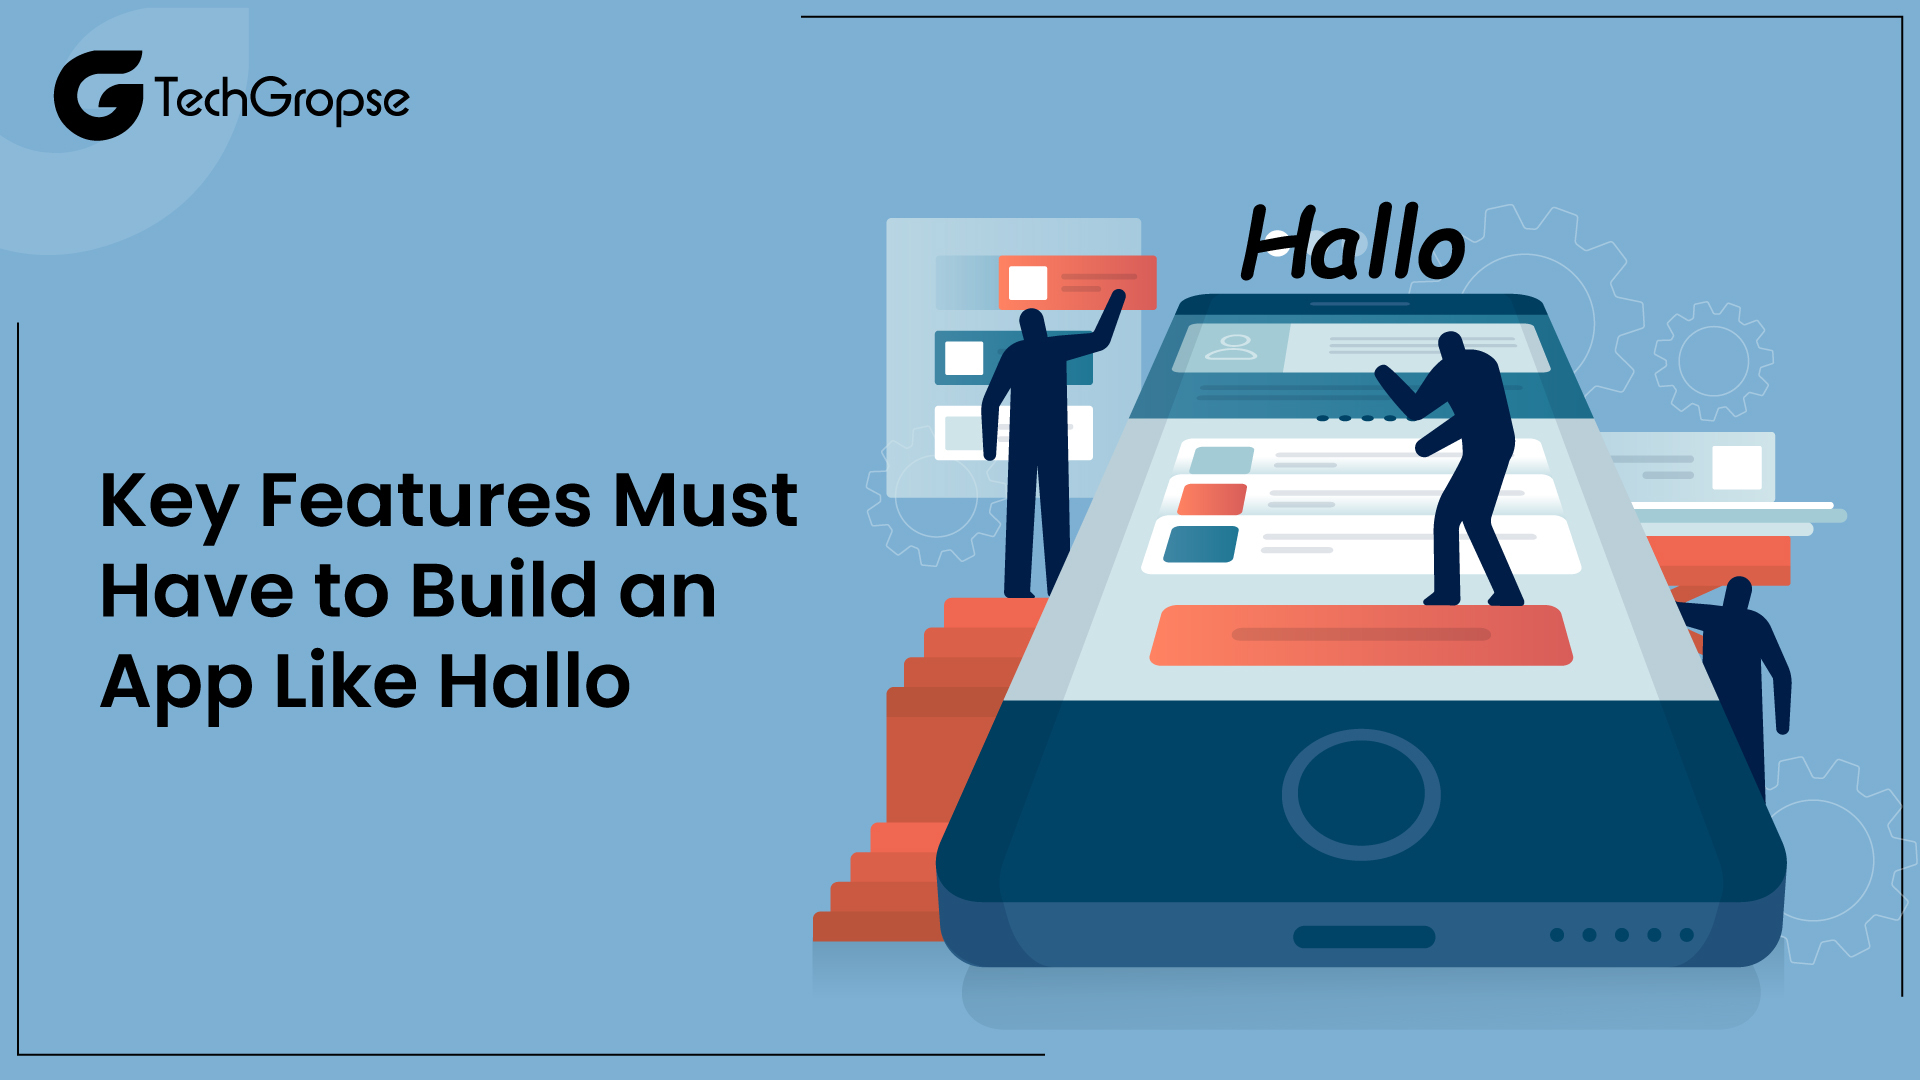 Key Features Must Have to Build an App Like Hallo